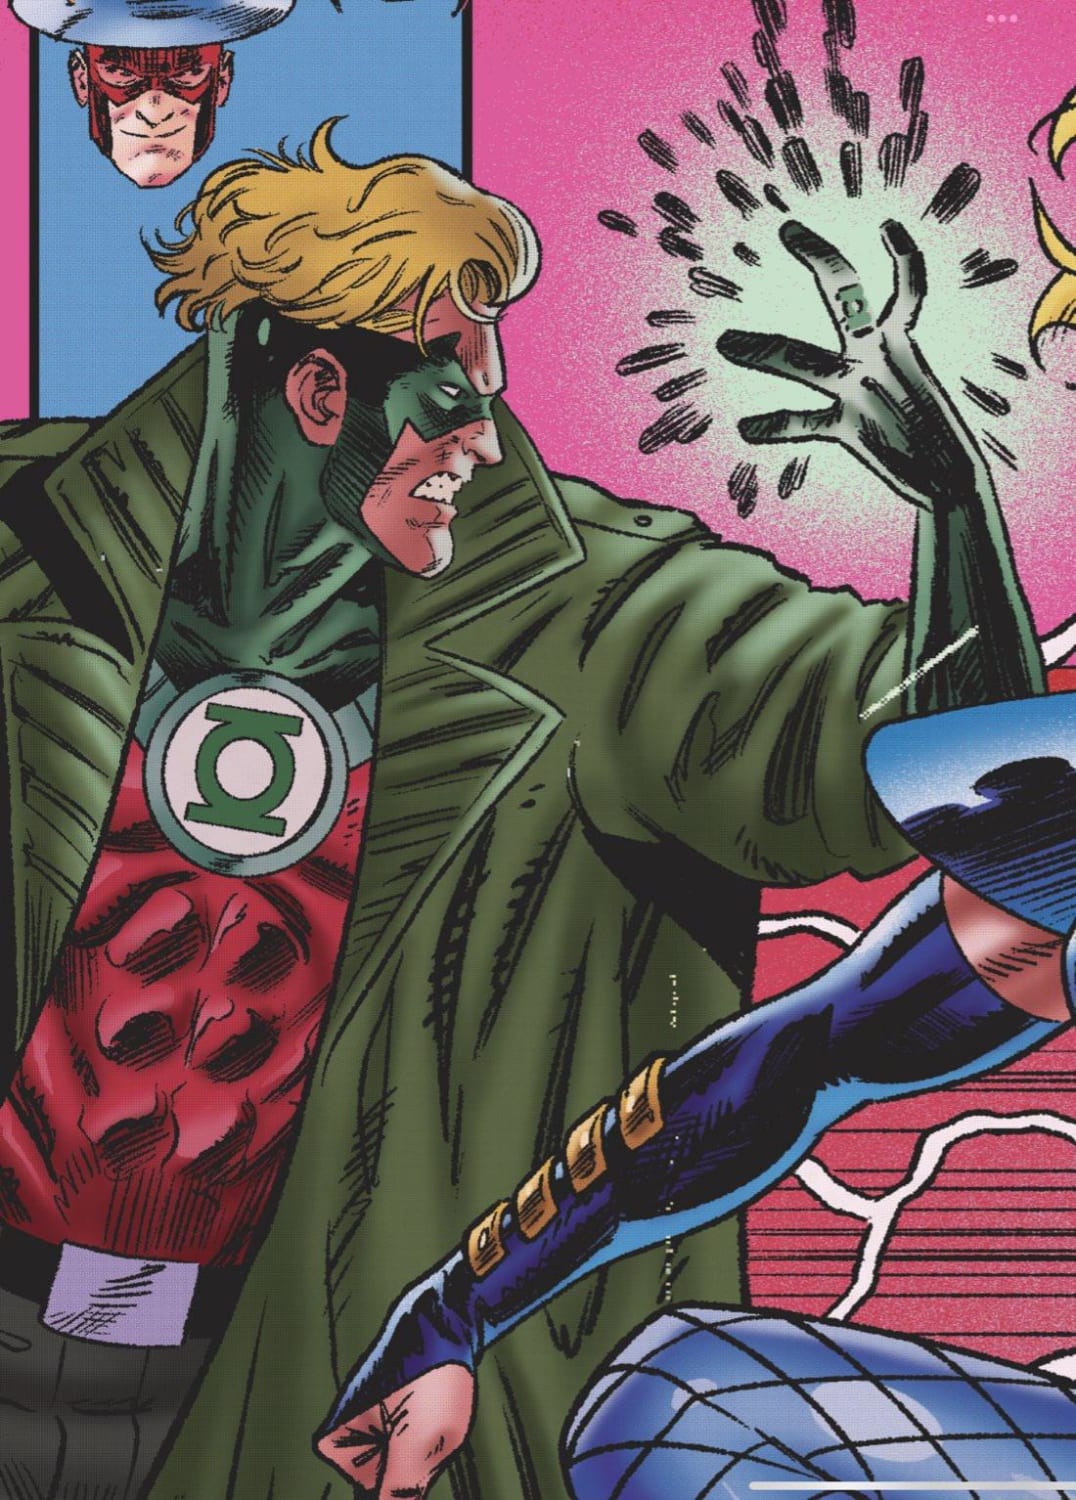 [Artwork] This 90s redesign of Alan Scott looks so good (by Joe Quinones from Justice Society of America #1)